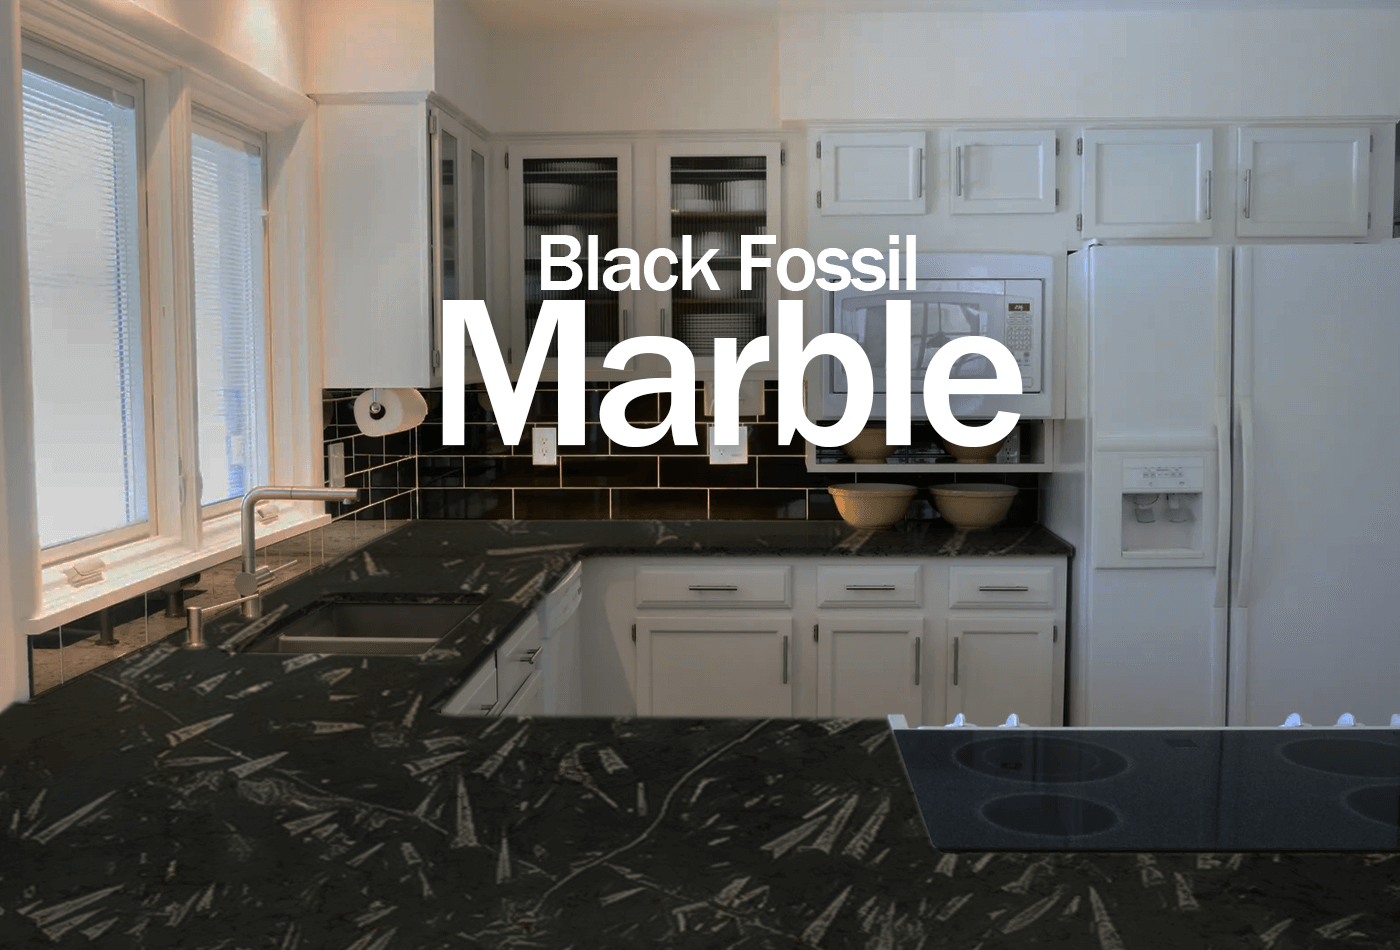 Black Fossil Marble: Unraveling the Black Mystery!